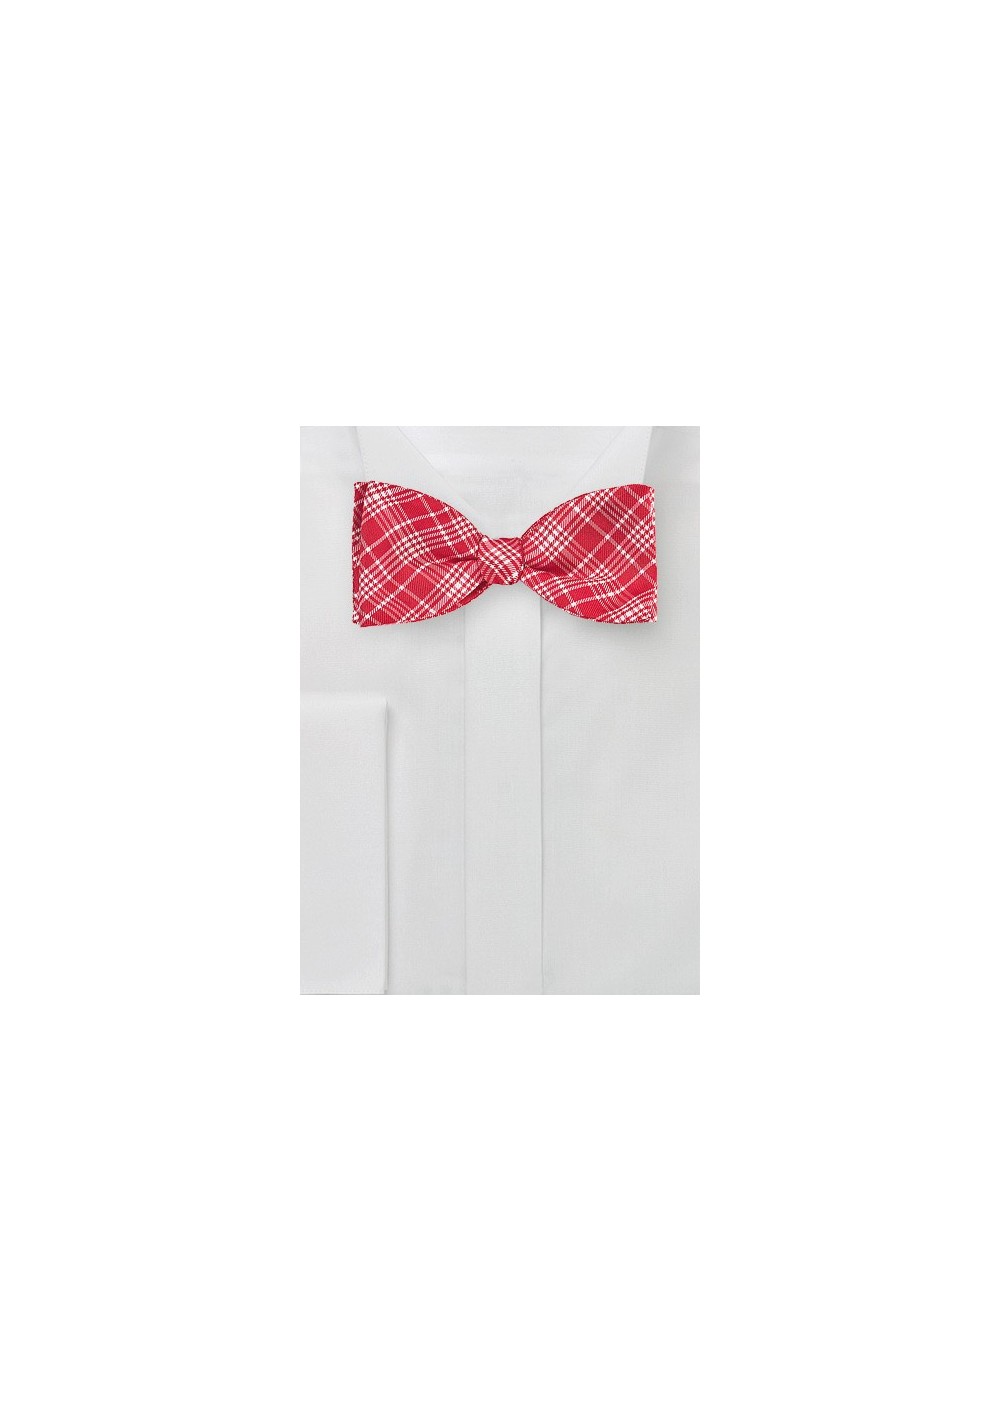 Bright Red Silk Bow Tie with Modern Plaid Design